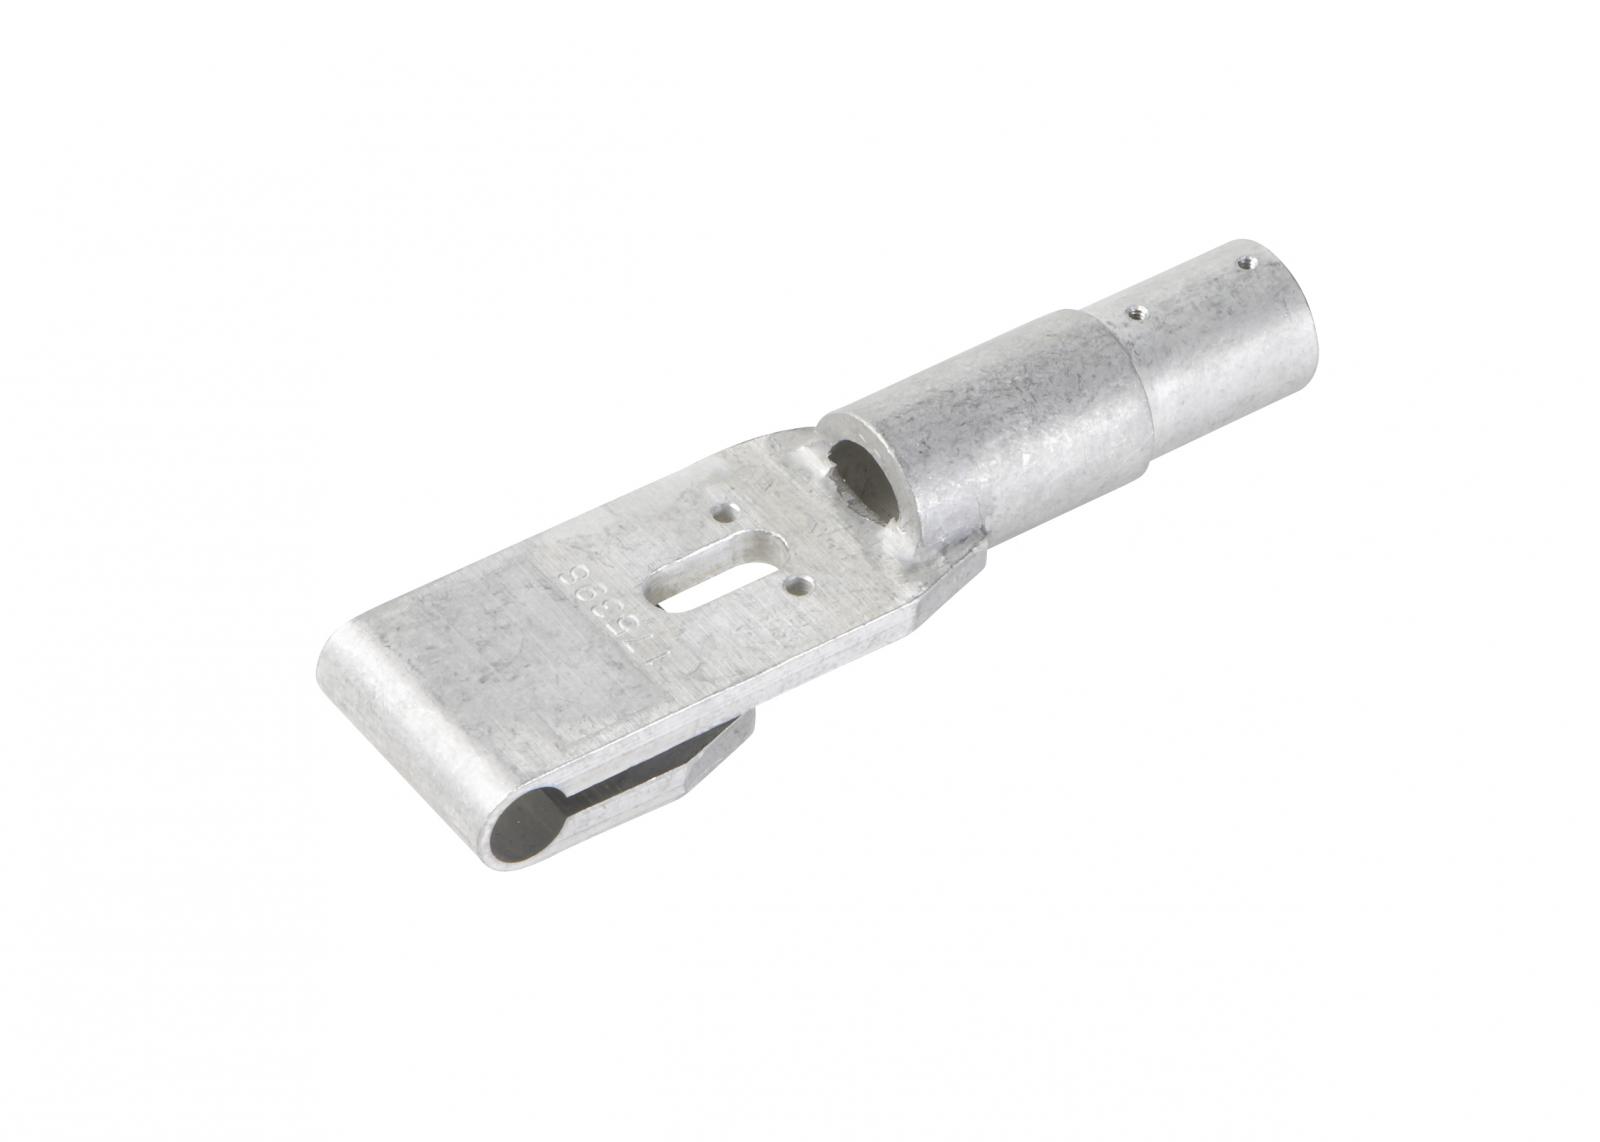 TapeTech® Hinge Casting. Part number 196003